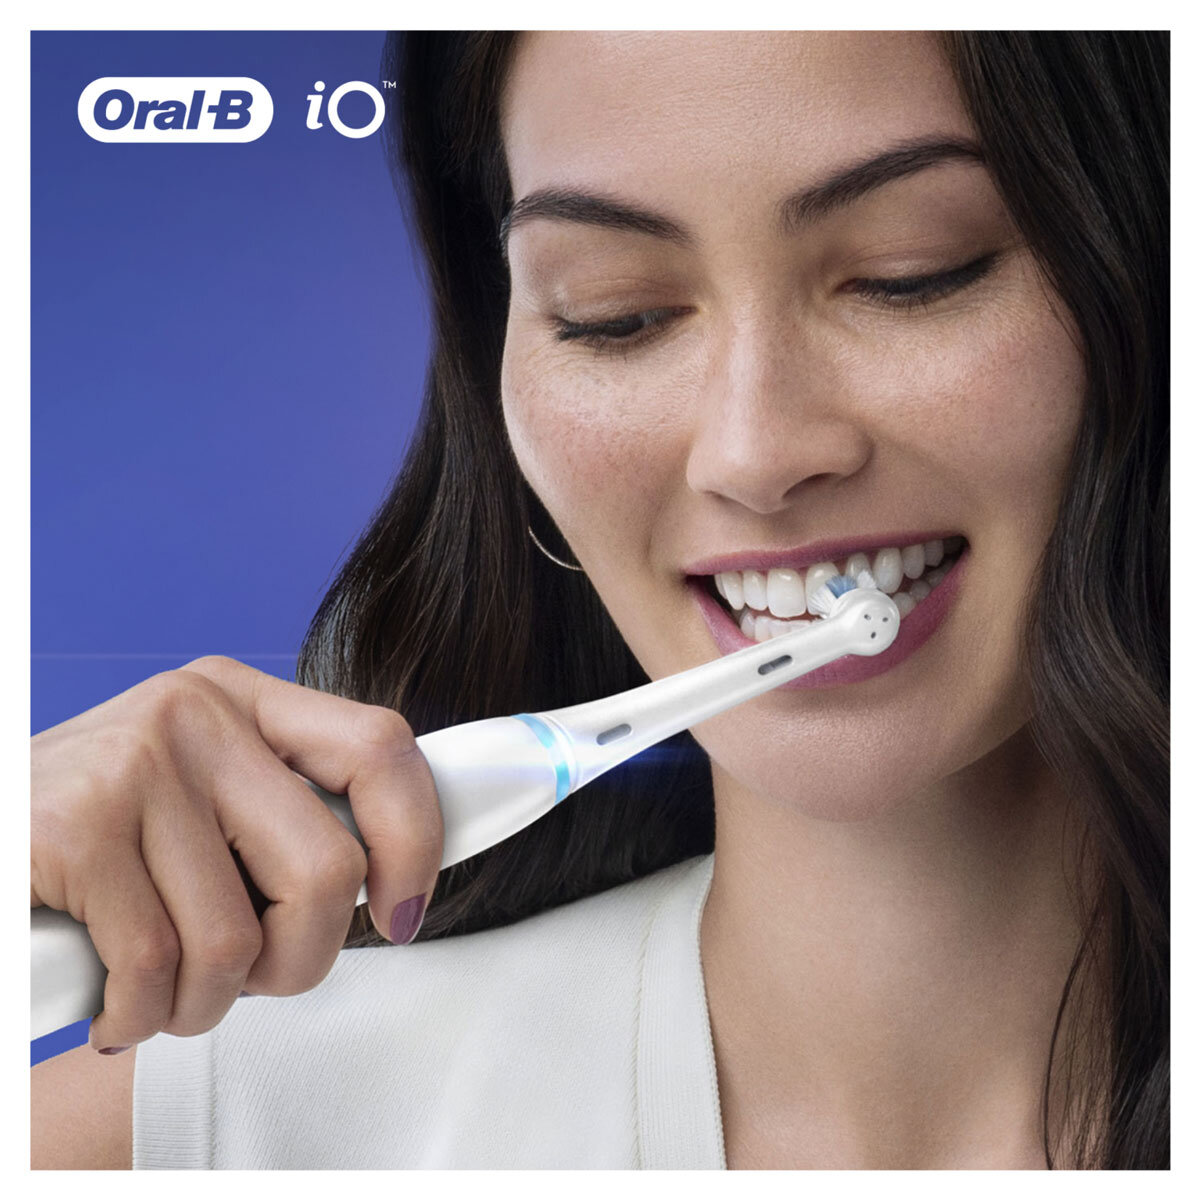 Lifestyle image of woman holding an oral b toothbrush